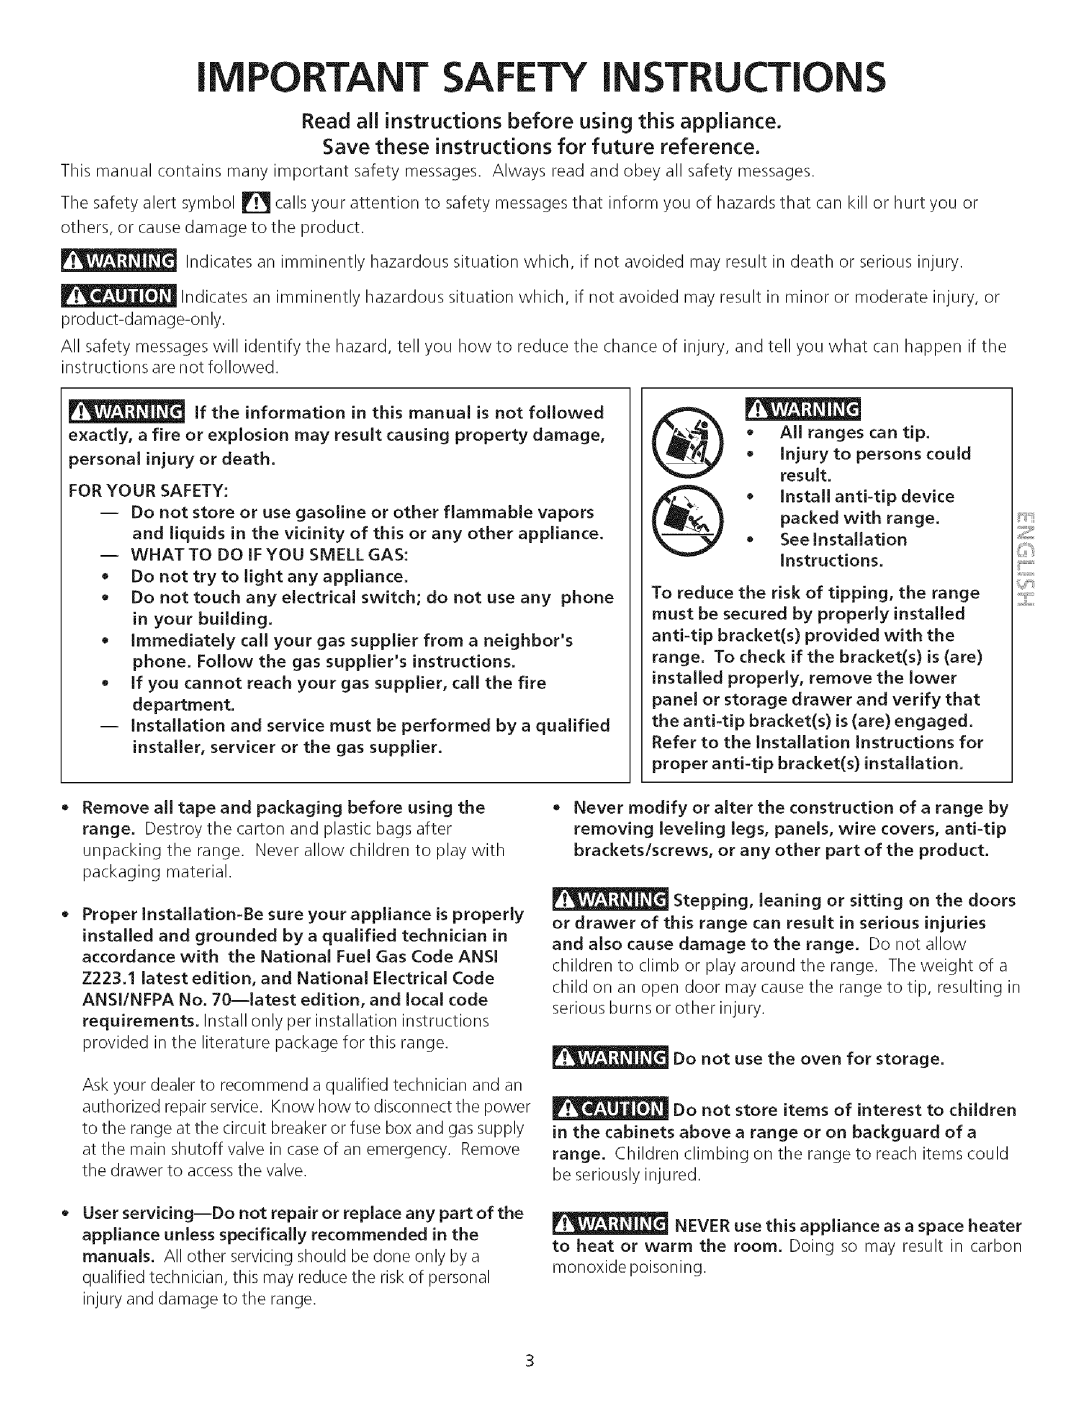 Kenmore 790.75503 manual iMPORTANT SAFETY iNSTRUCTiONS, Read all instructions before using this appliance 